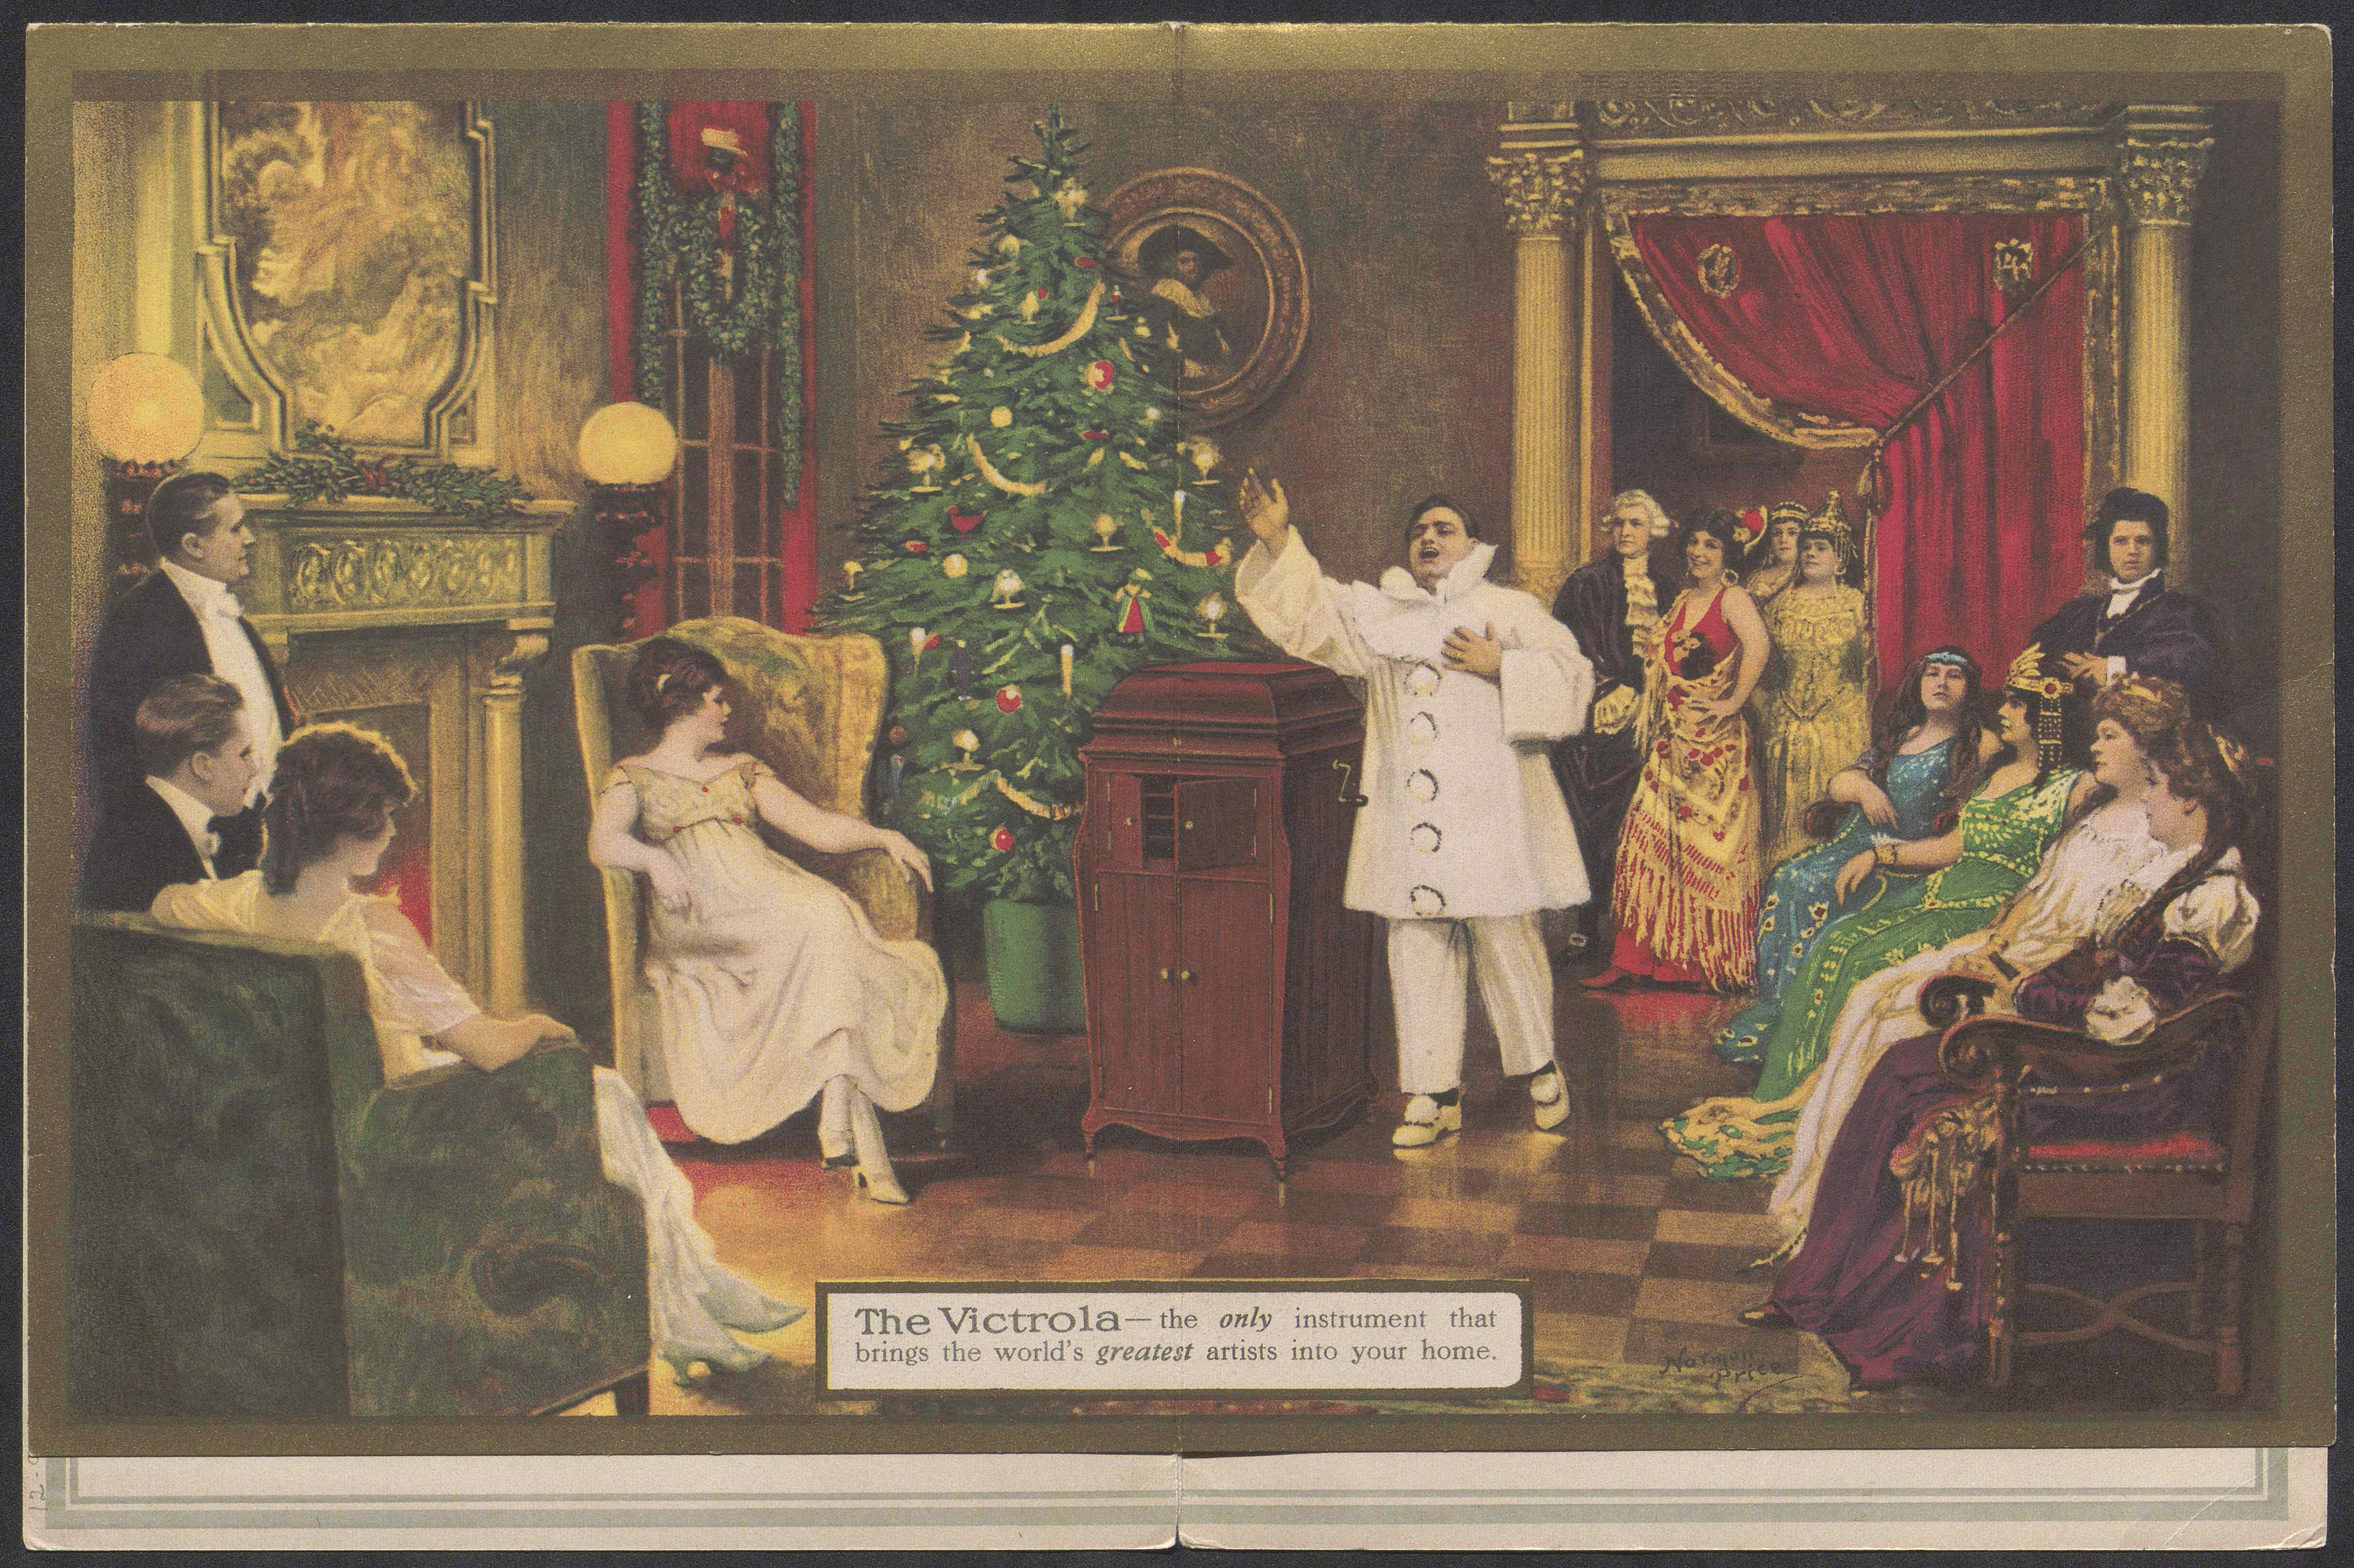 Color illustration of a lavishly decorated interior with a Christmas tree, victrola & performer.